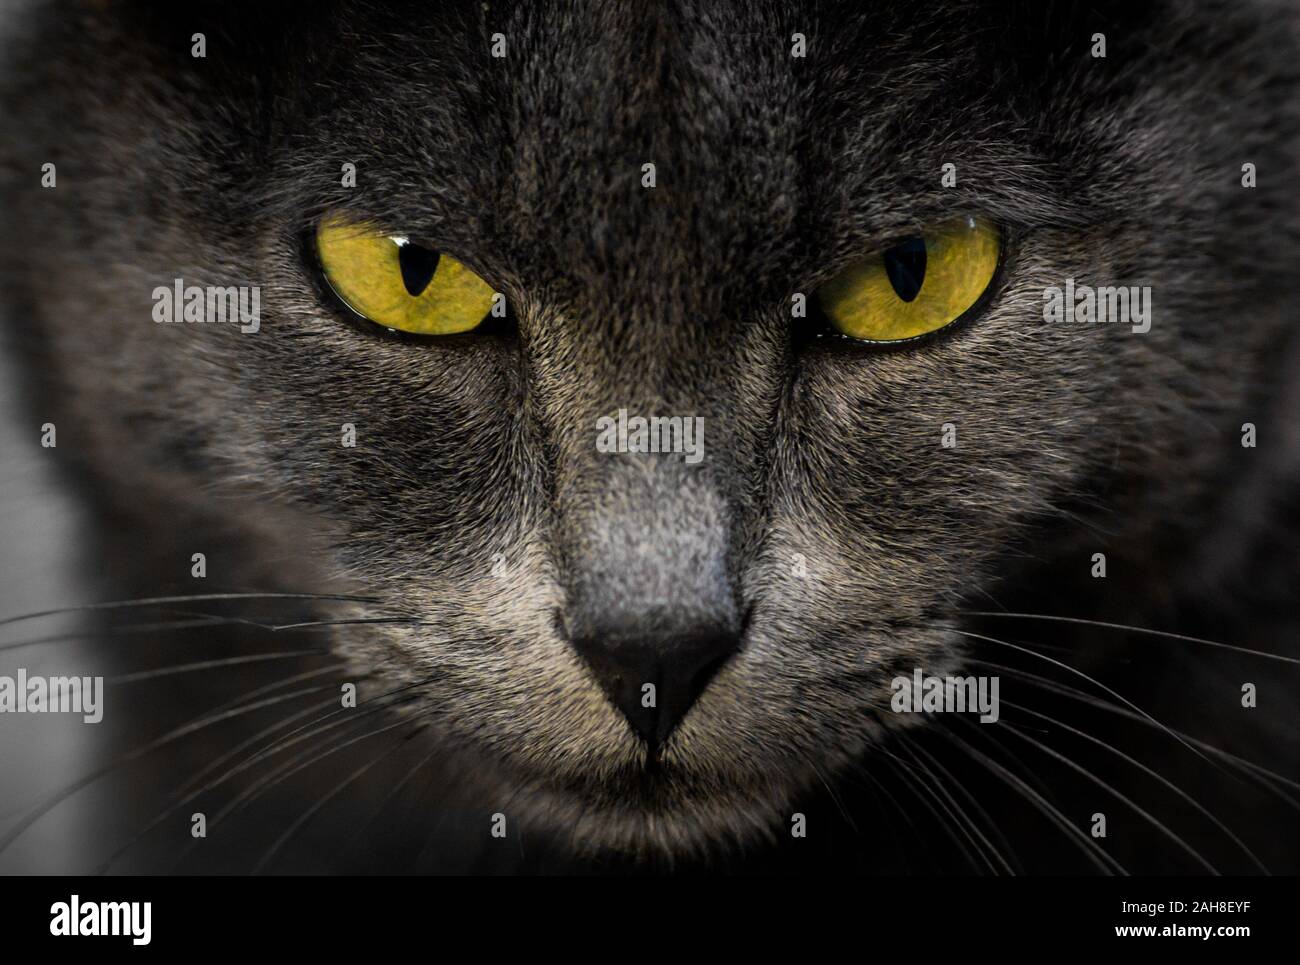 Close up portrait of a grey Chartreux cat staring back at the camera with yellow eyes Stock Photo